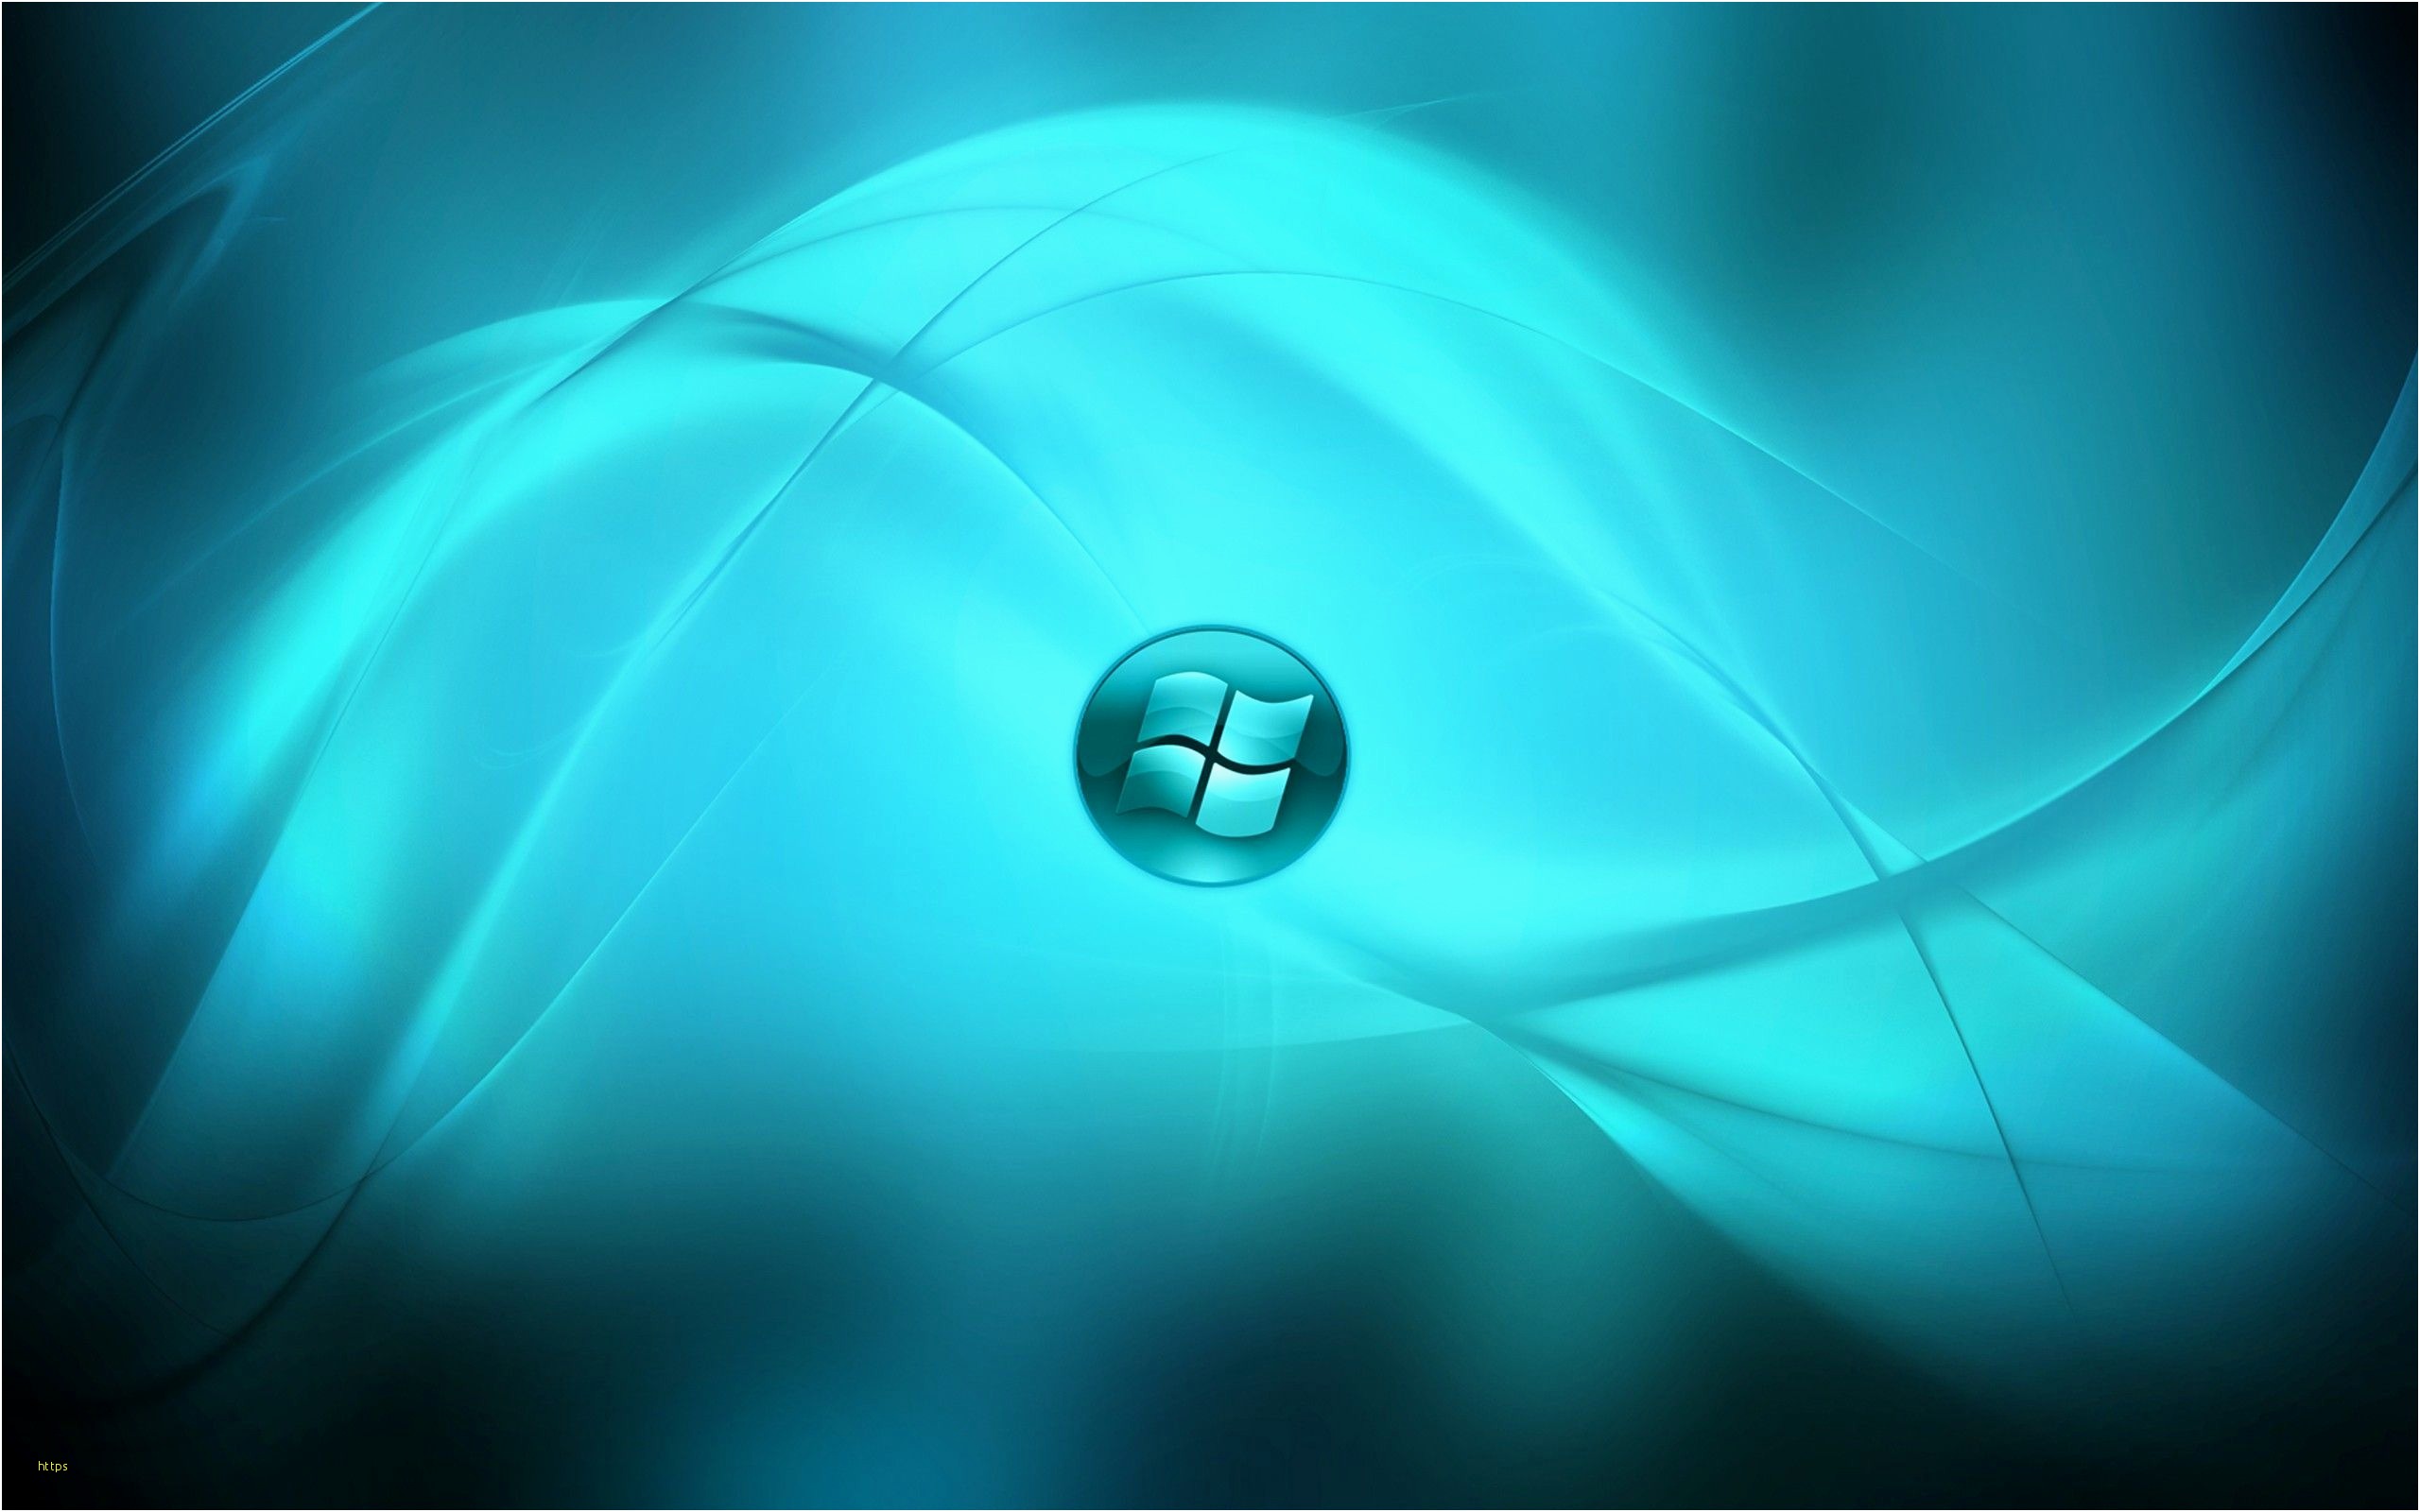 Awesome Windows Wallpaper On